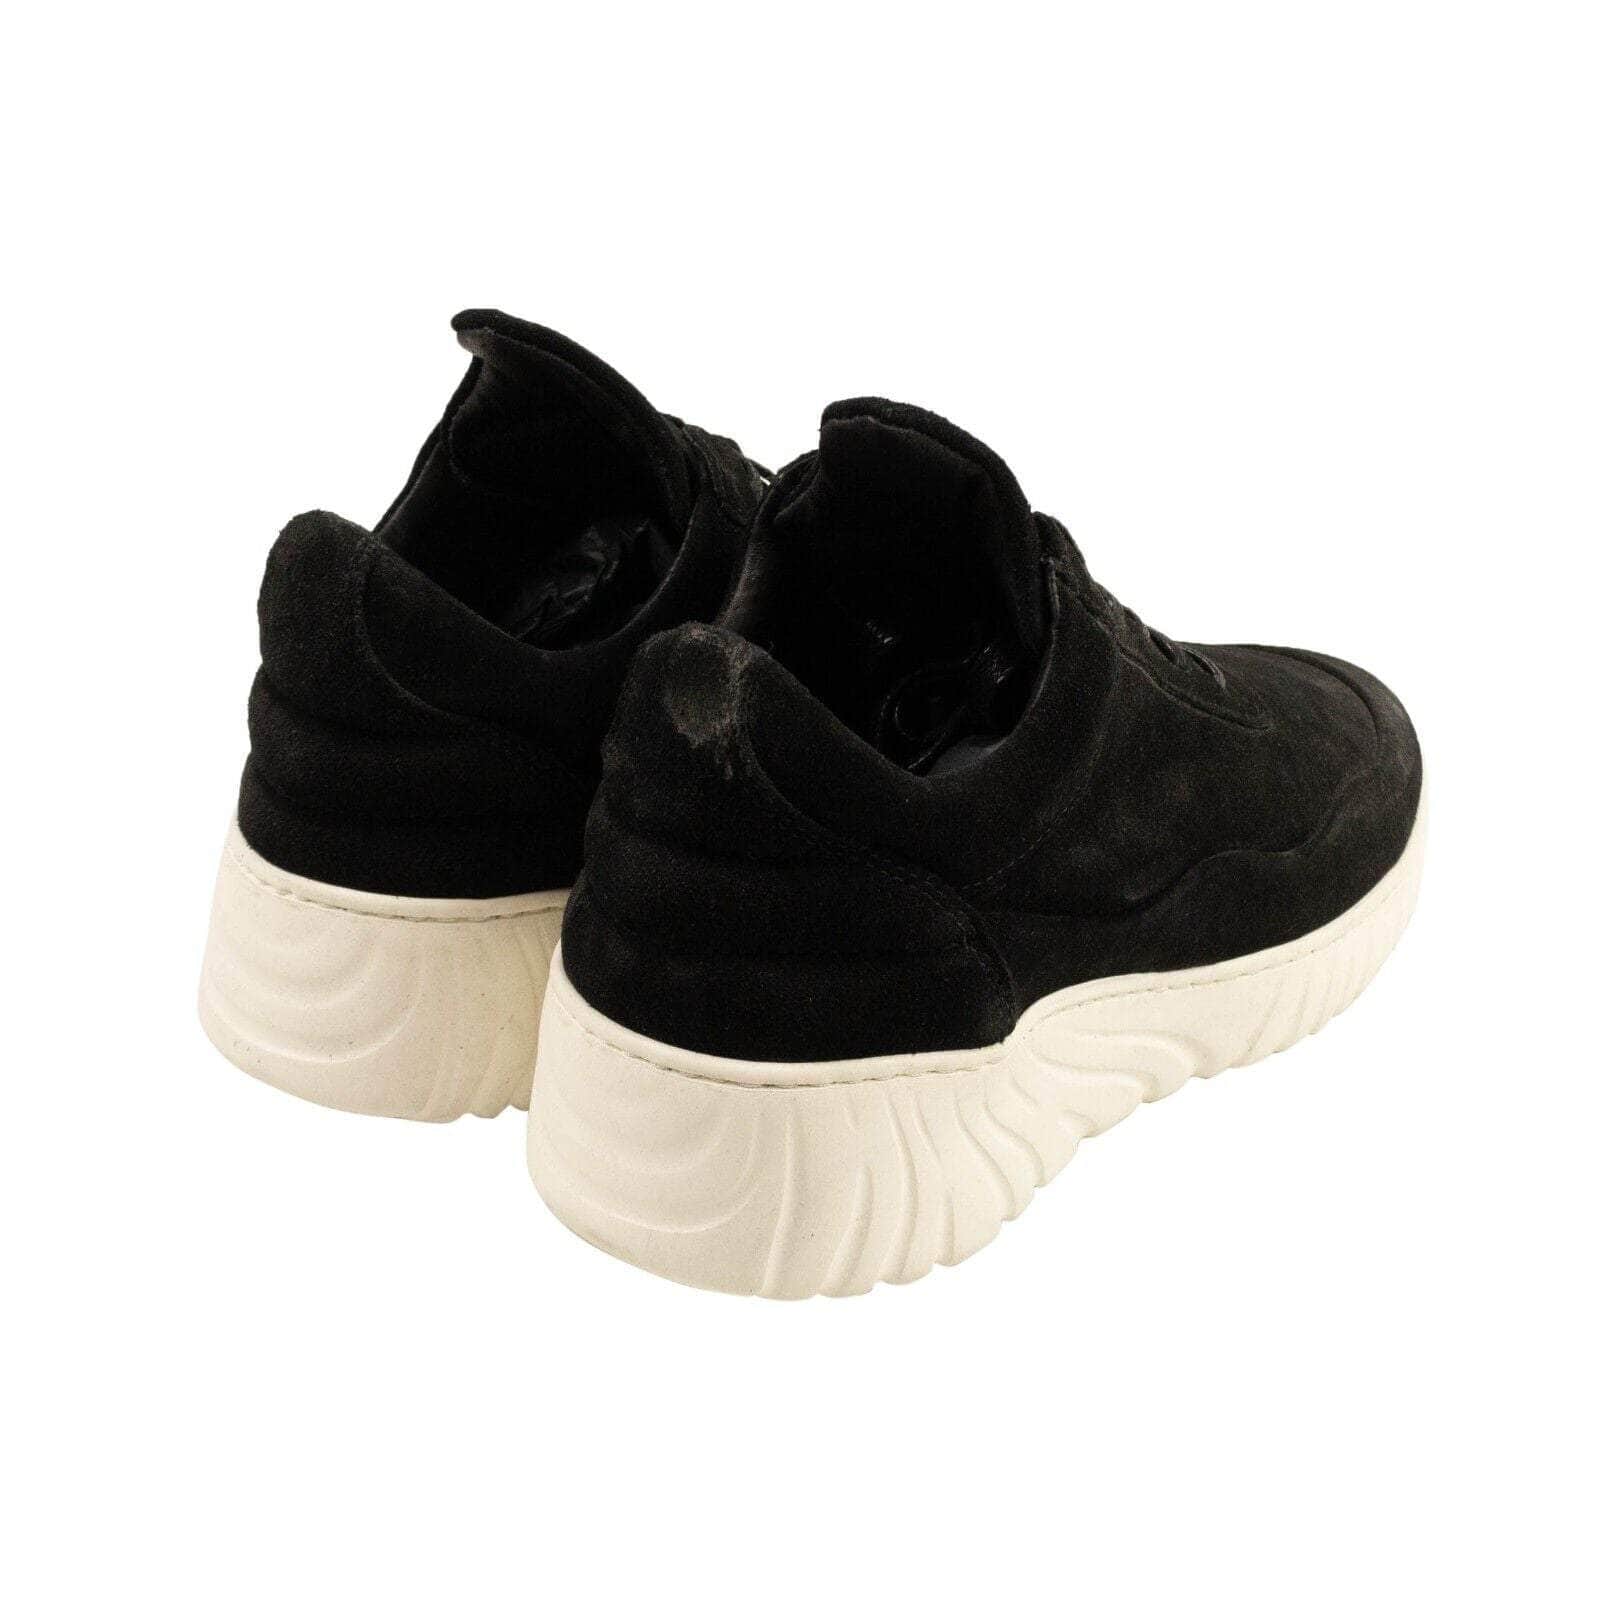 Filling Pieces channelenable-all, chicmi, couponcollection, filling-pieces, gender-mens, main-shoes, mens-shoes, size-38, under-250 38 Black Suede Roots Runner Sneakers 95-FLP-2004/38 95-FLP-2004/38